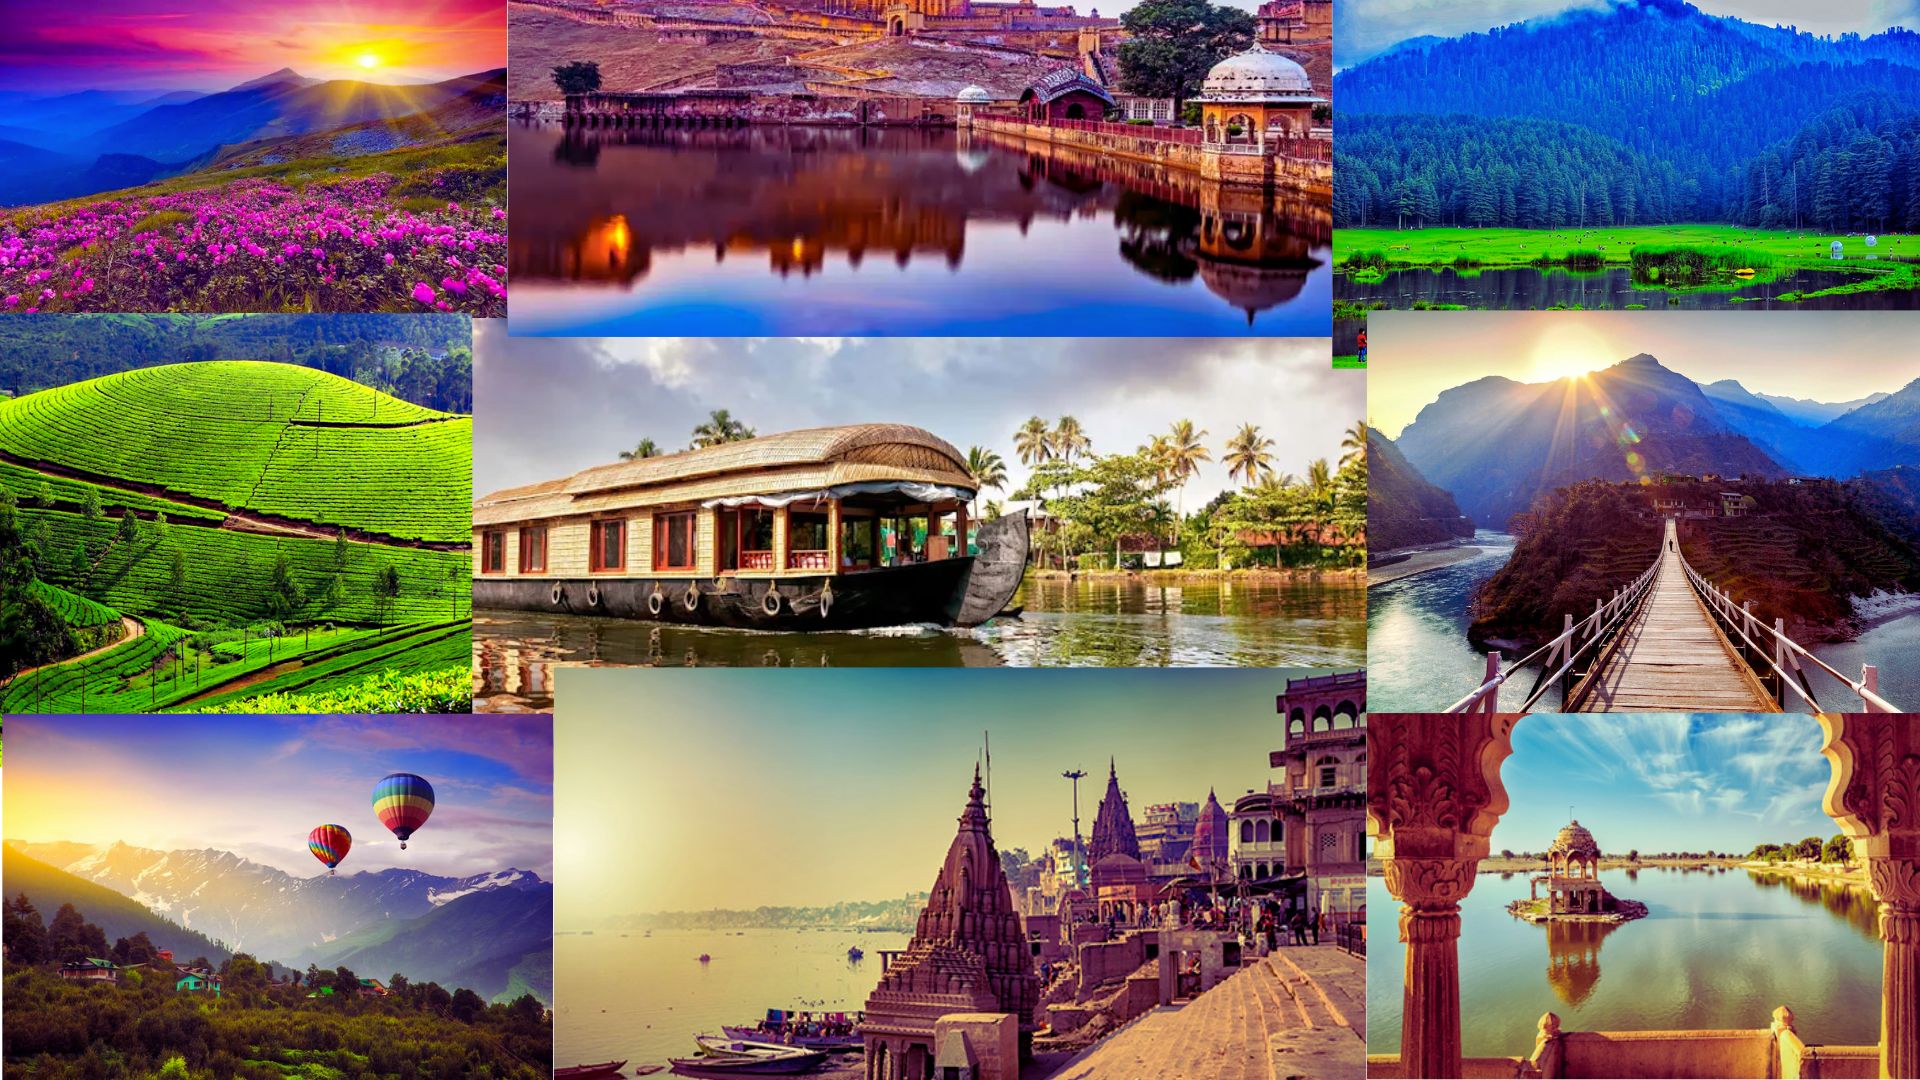 irctc summer tour packages 2023